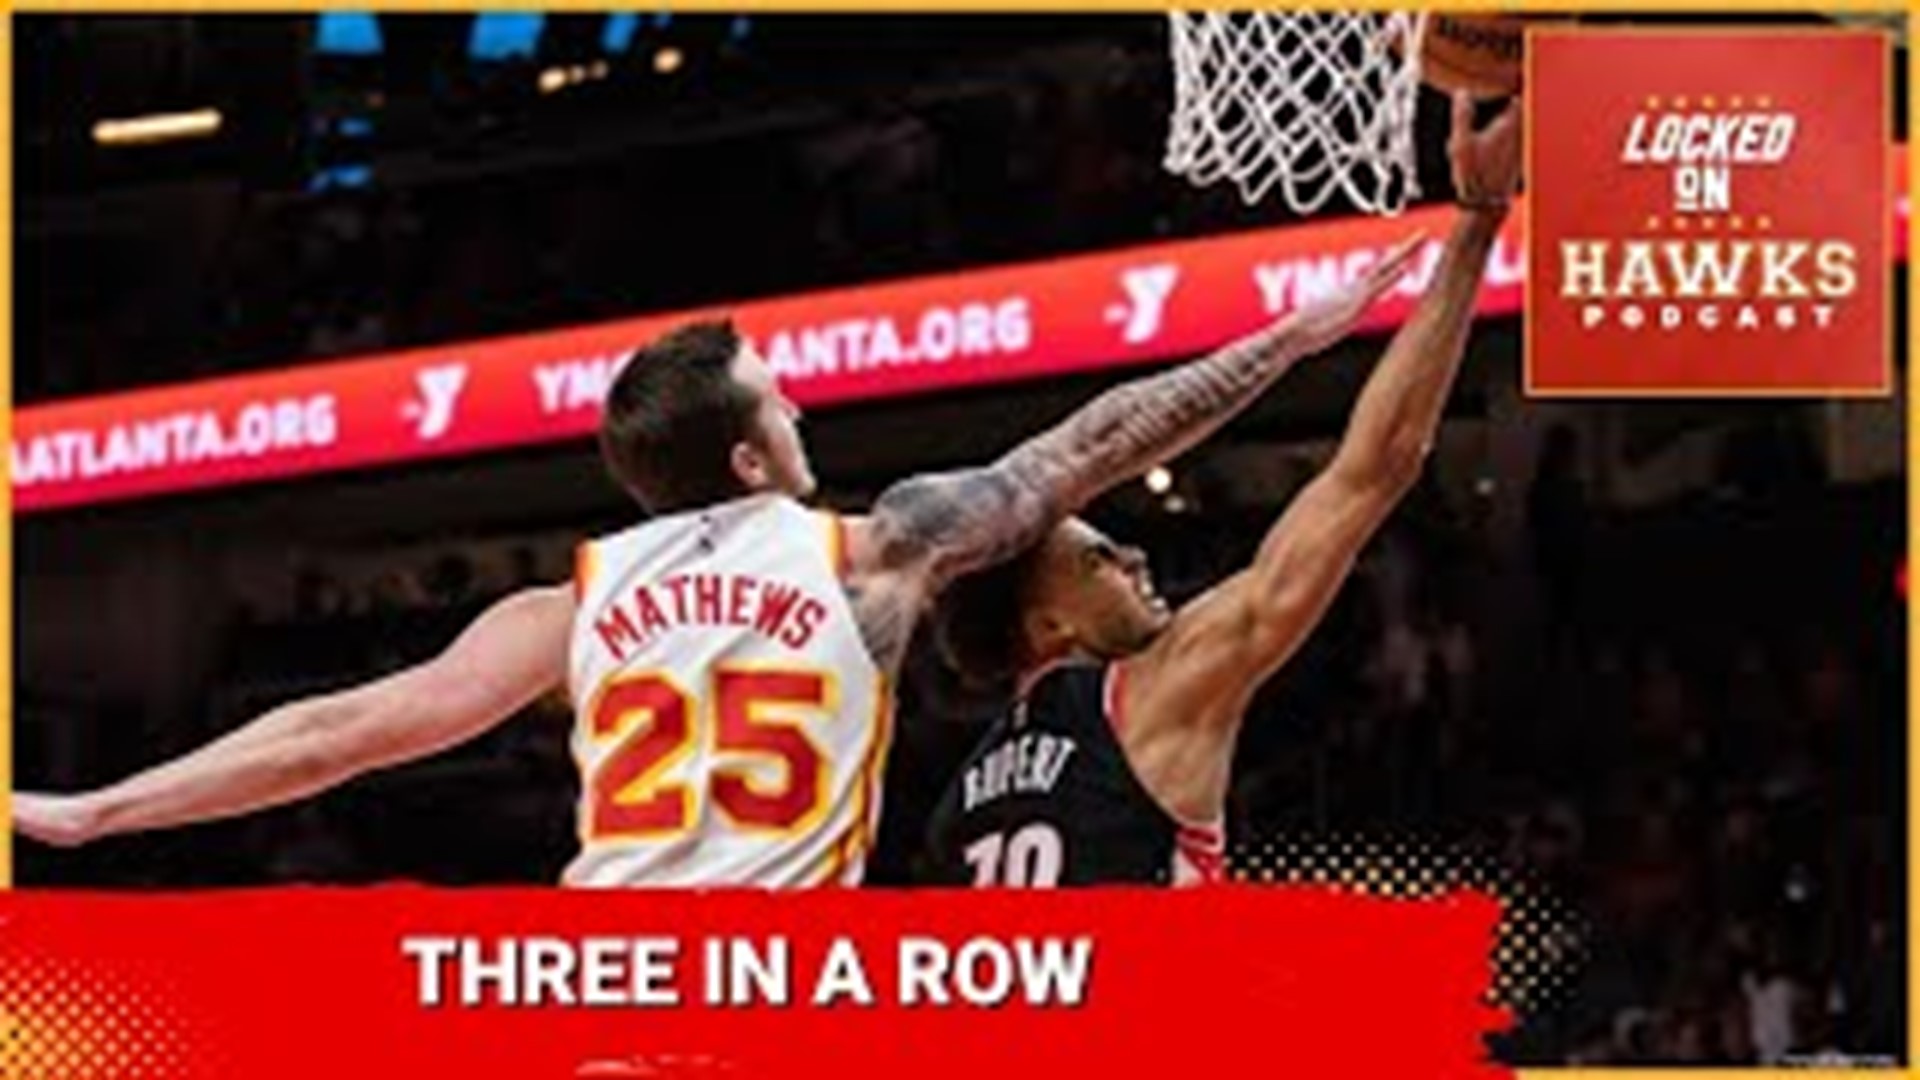 Brad Rowland hosts episode No. 1682 of the Locked on Hawks podcast. The show breaks down Wednesday's game between the Atlanta Hawks and the Portland Trail Blazers.